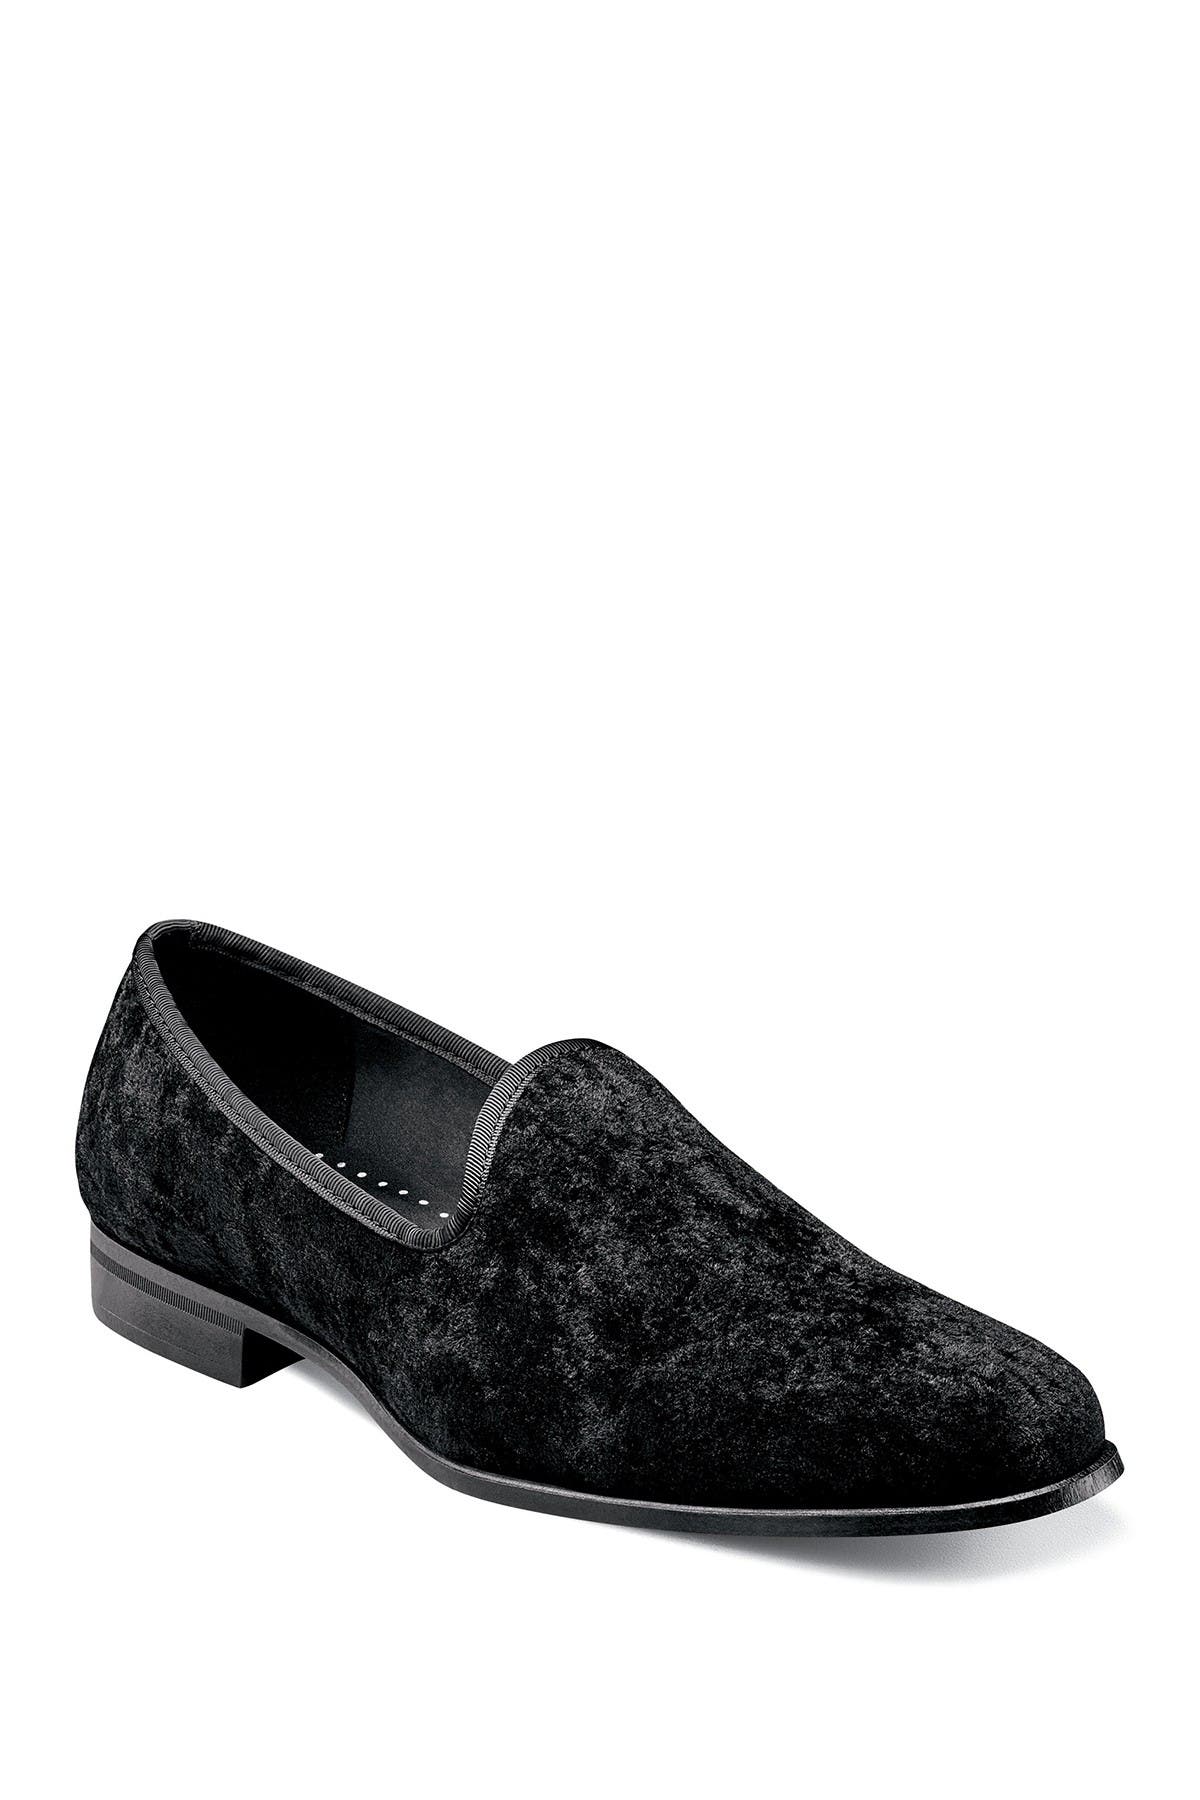 stacy adams sultan loafer